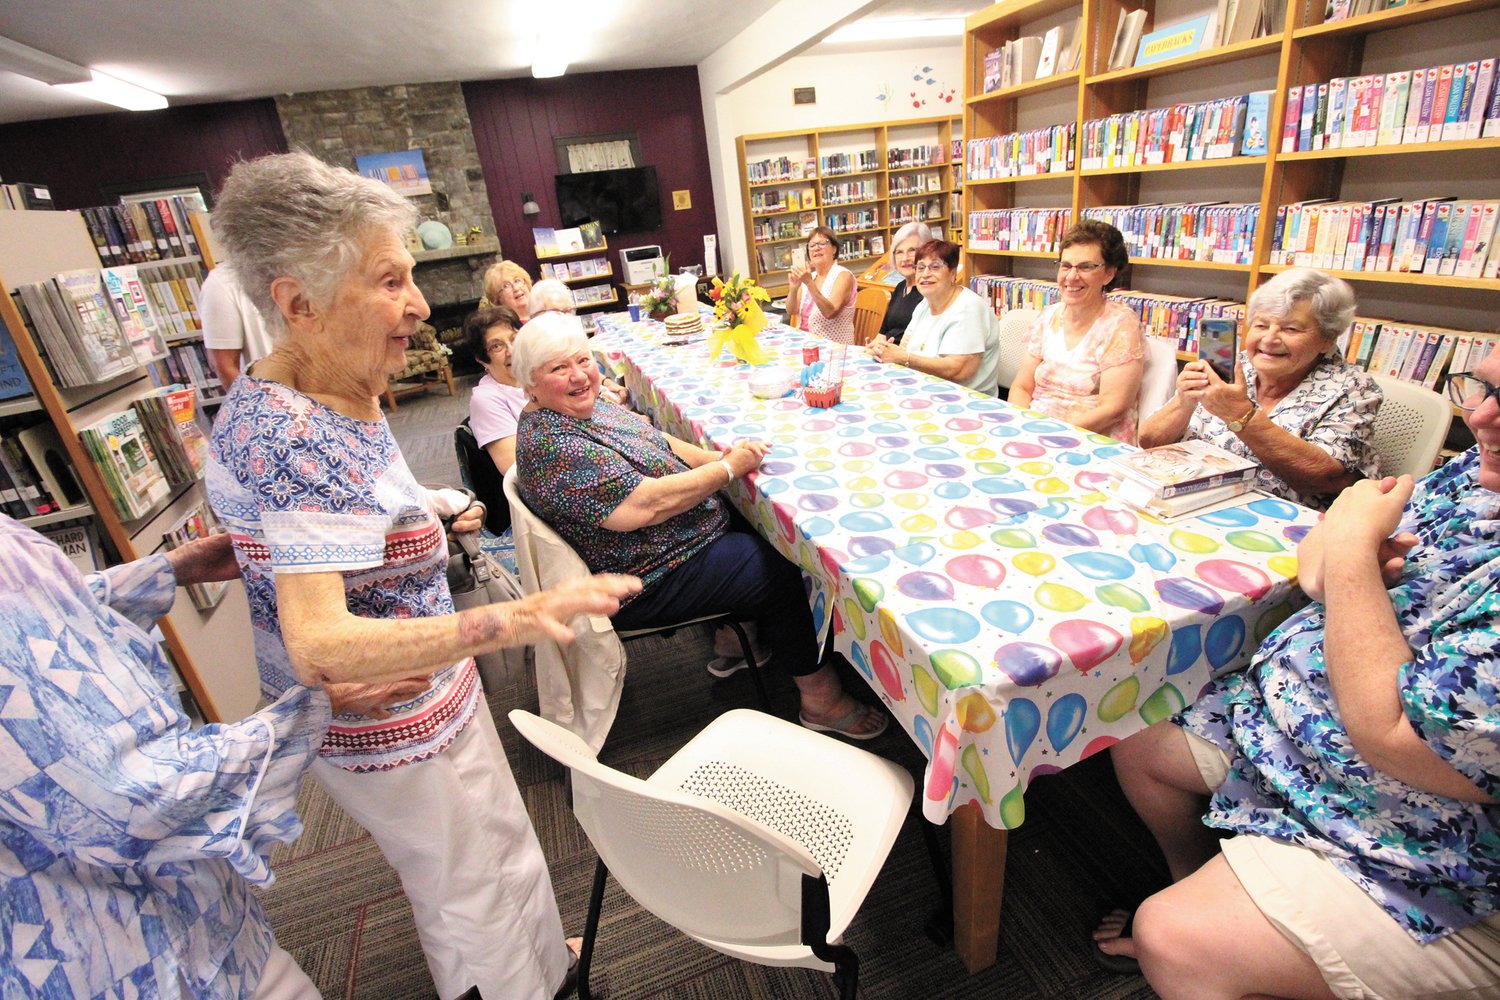 KNITTING FRIENDS: The knitting club that meets weekly at the Conimicut Library celebrated Betty’s birthday last Wednesday. Mayor Frank Picozzi stopped in to wish Betty happy birthday, which delighted her.